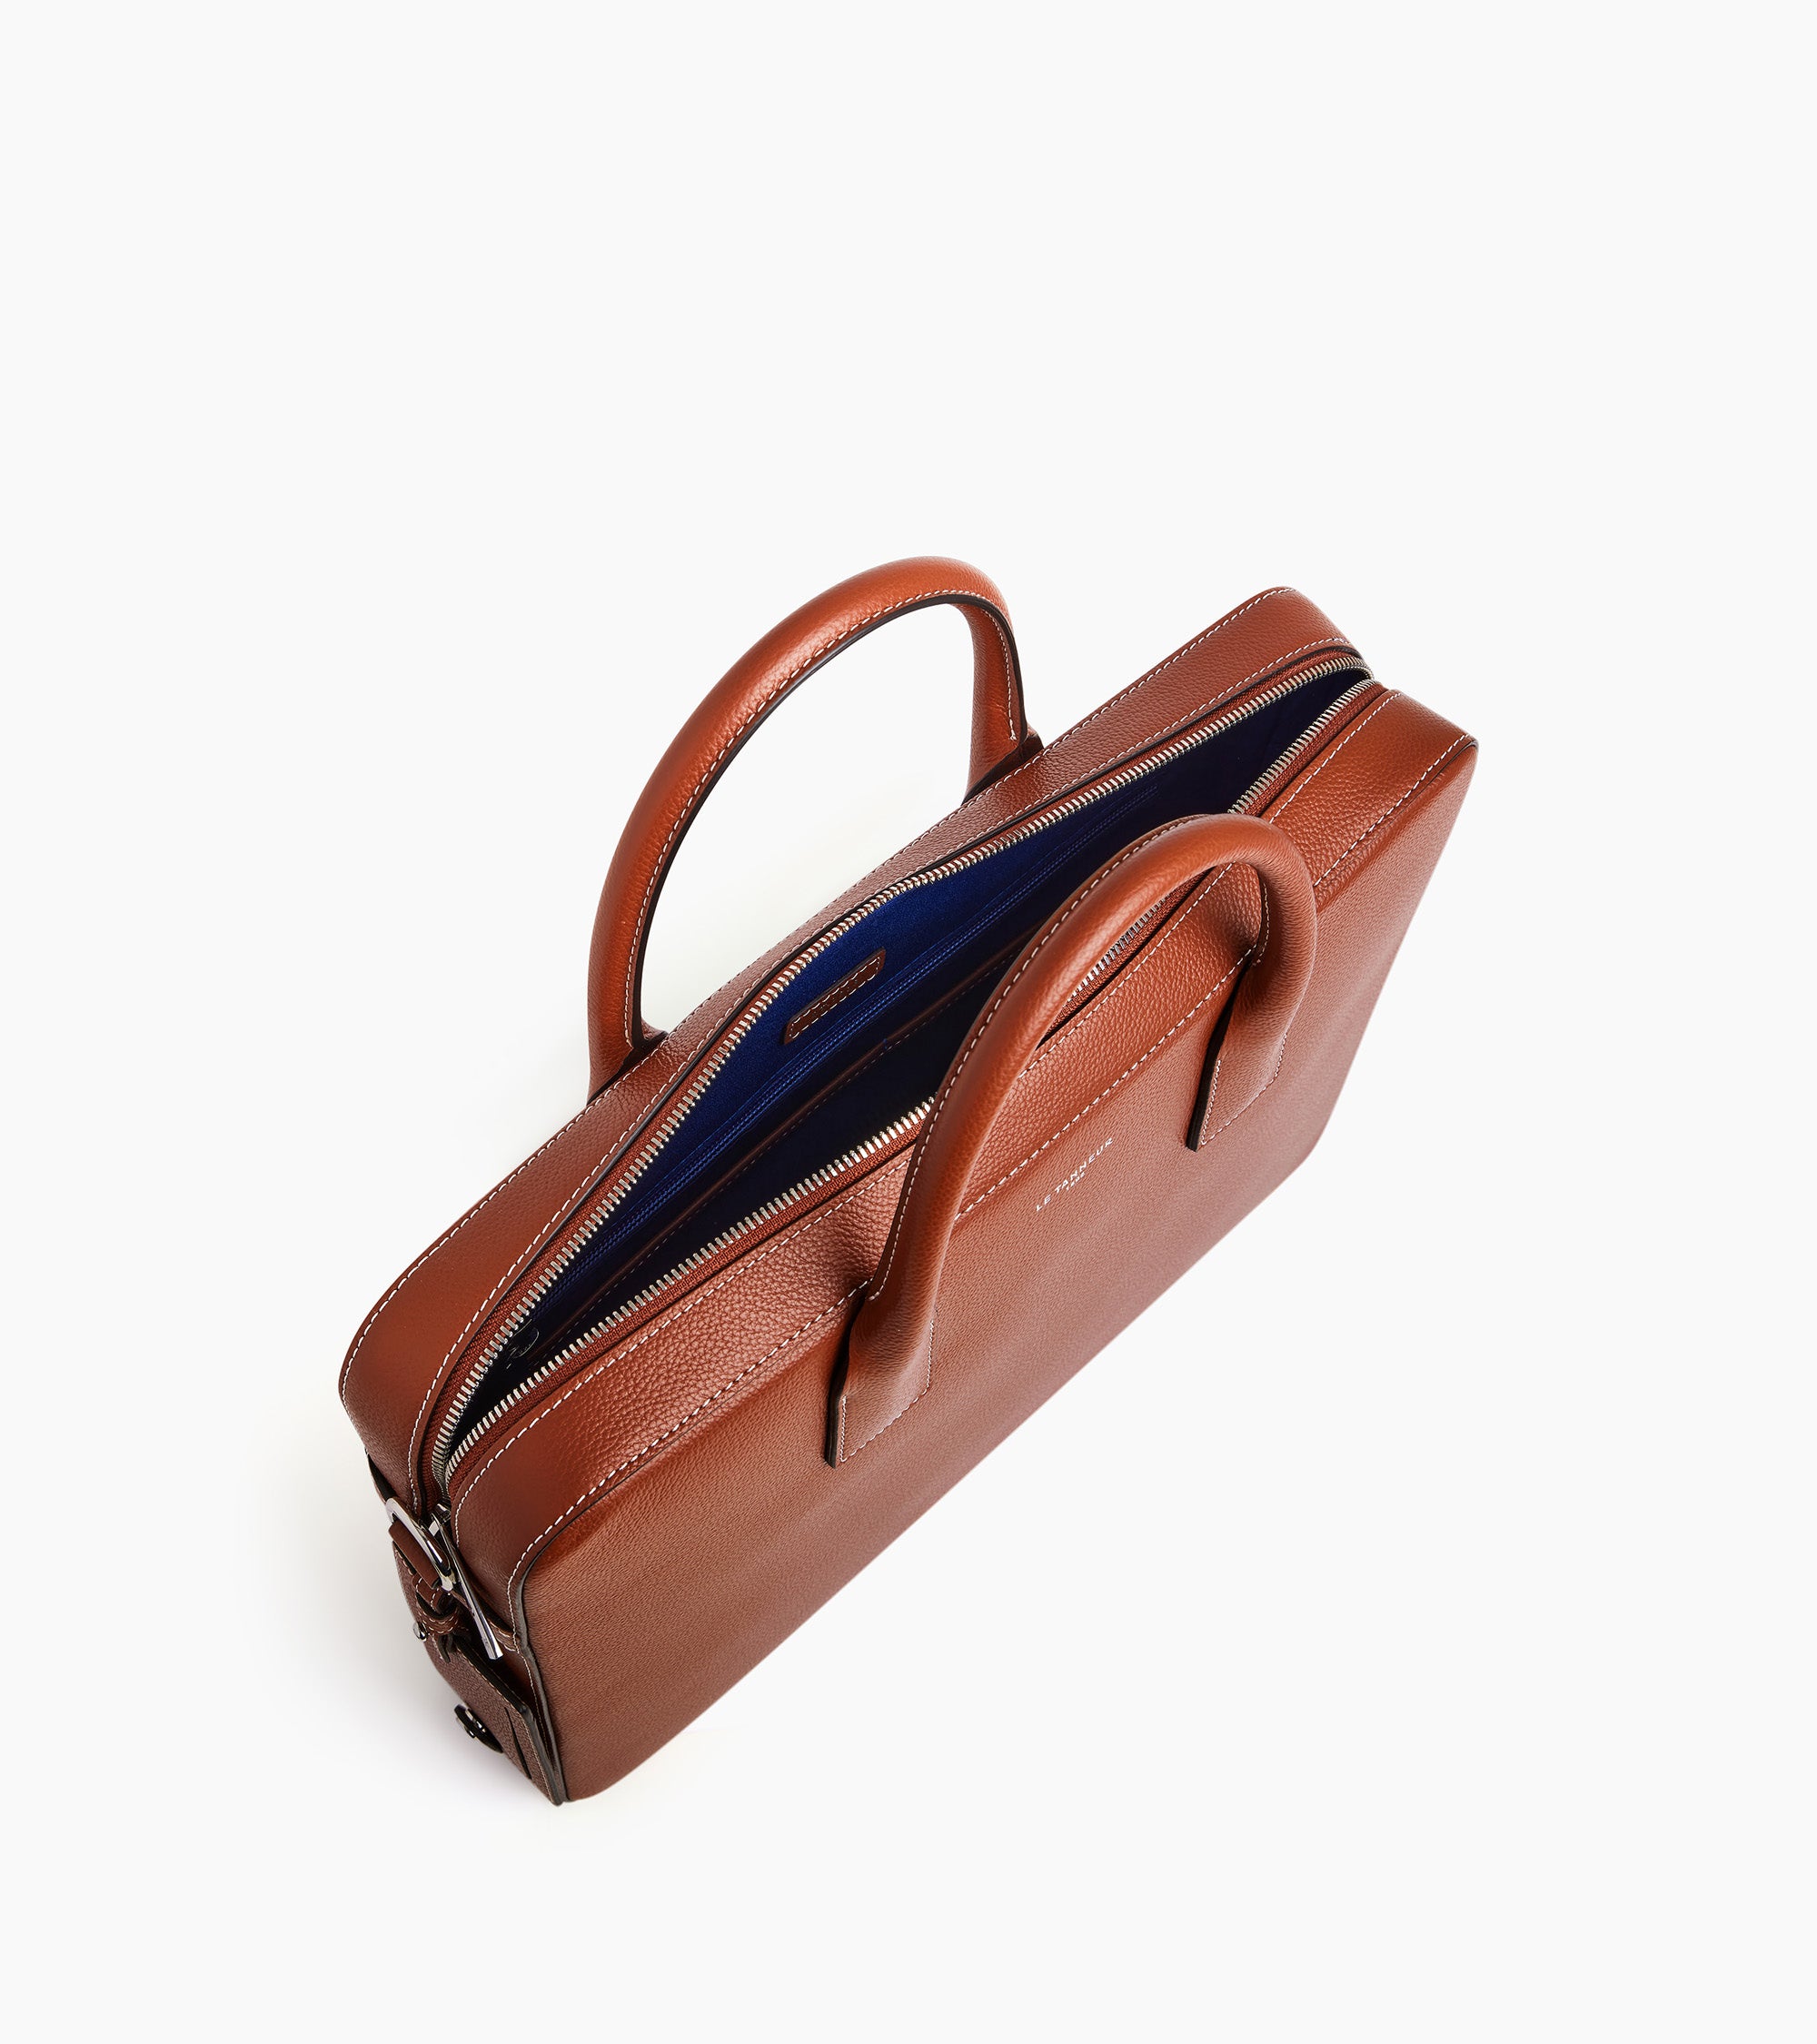 Emile 14" document holder in grained leather